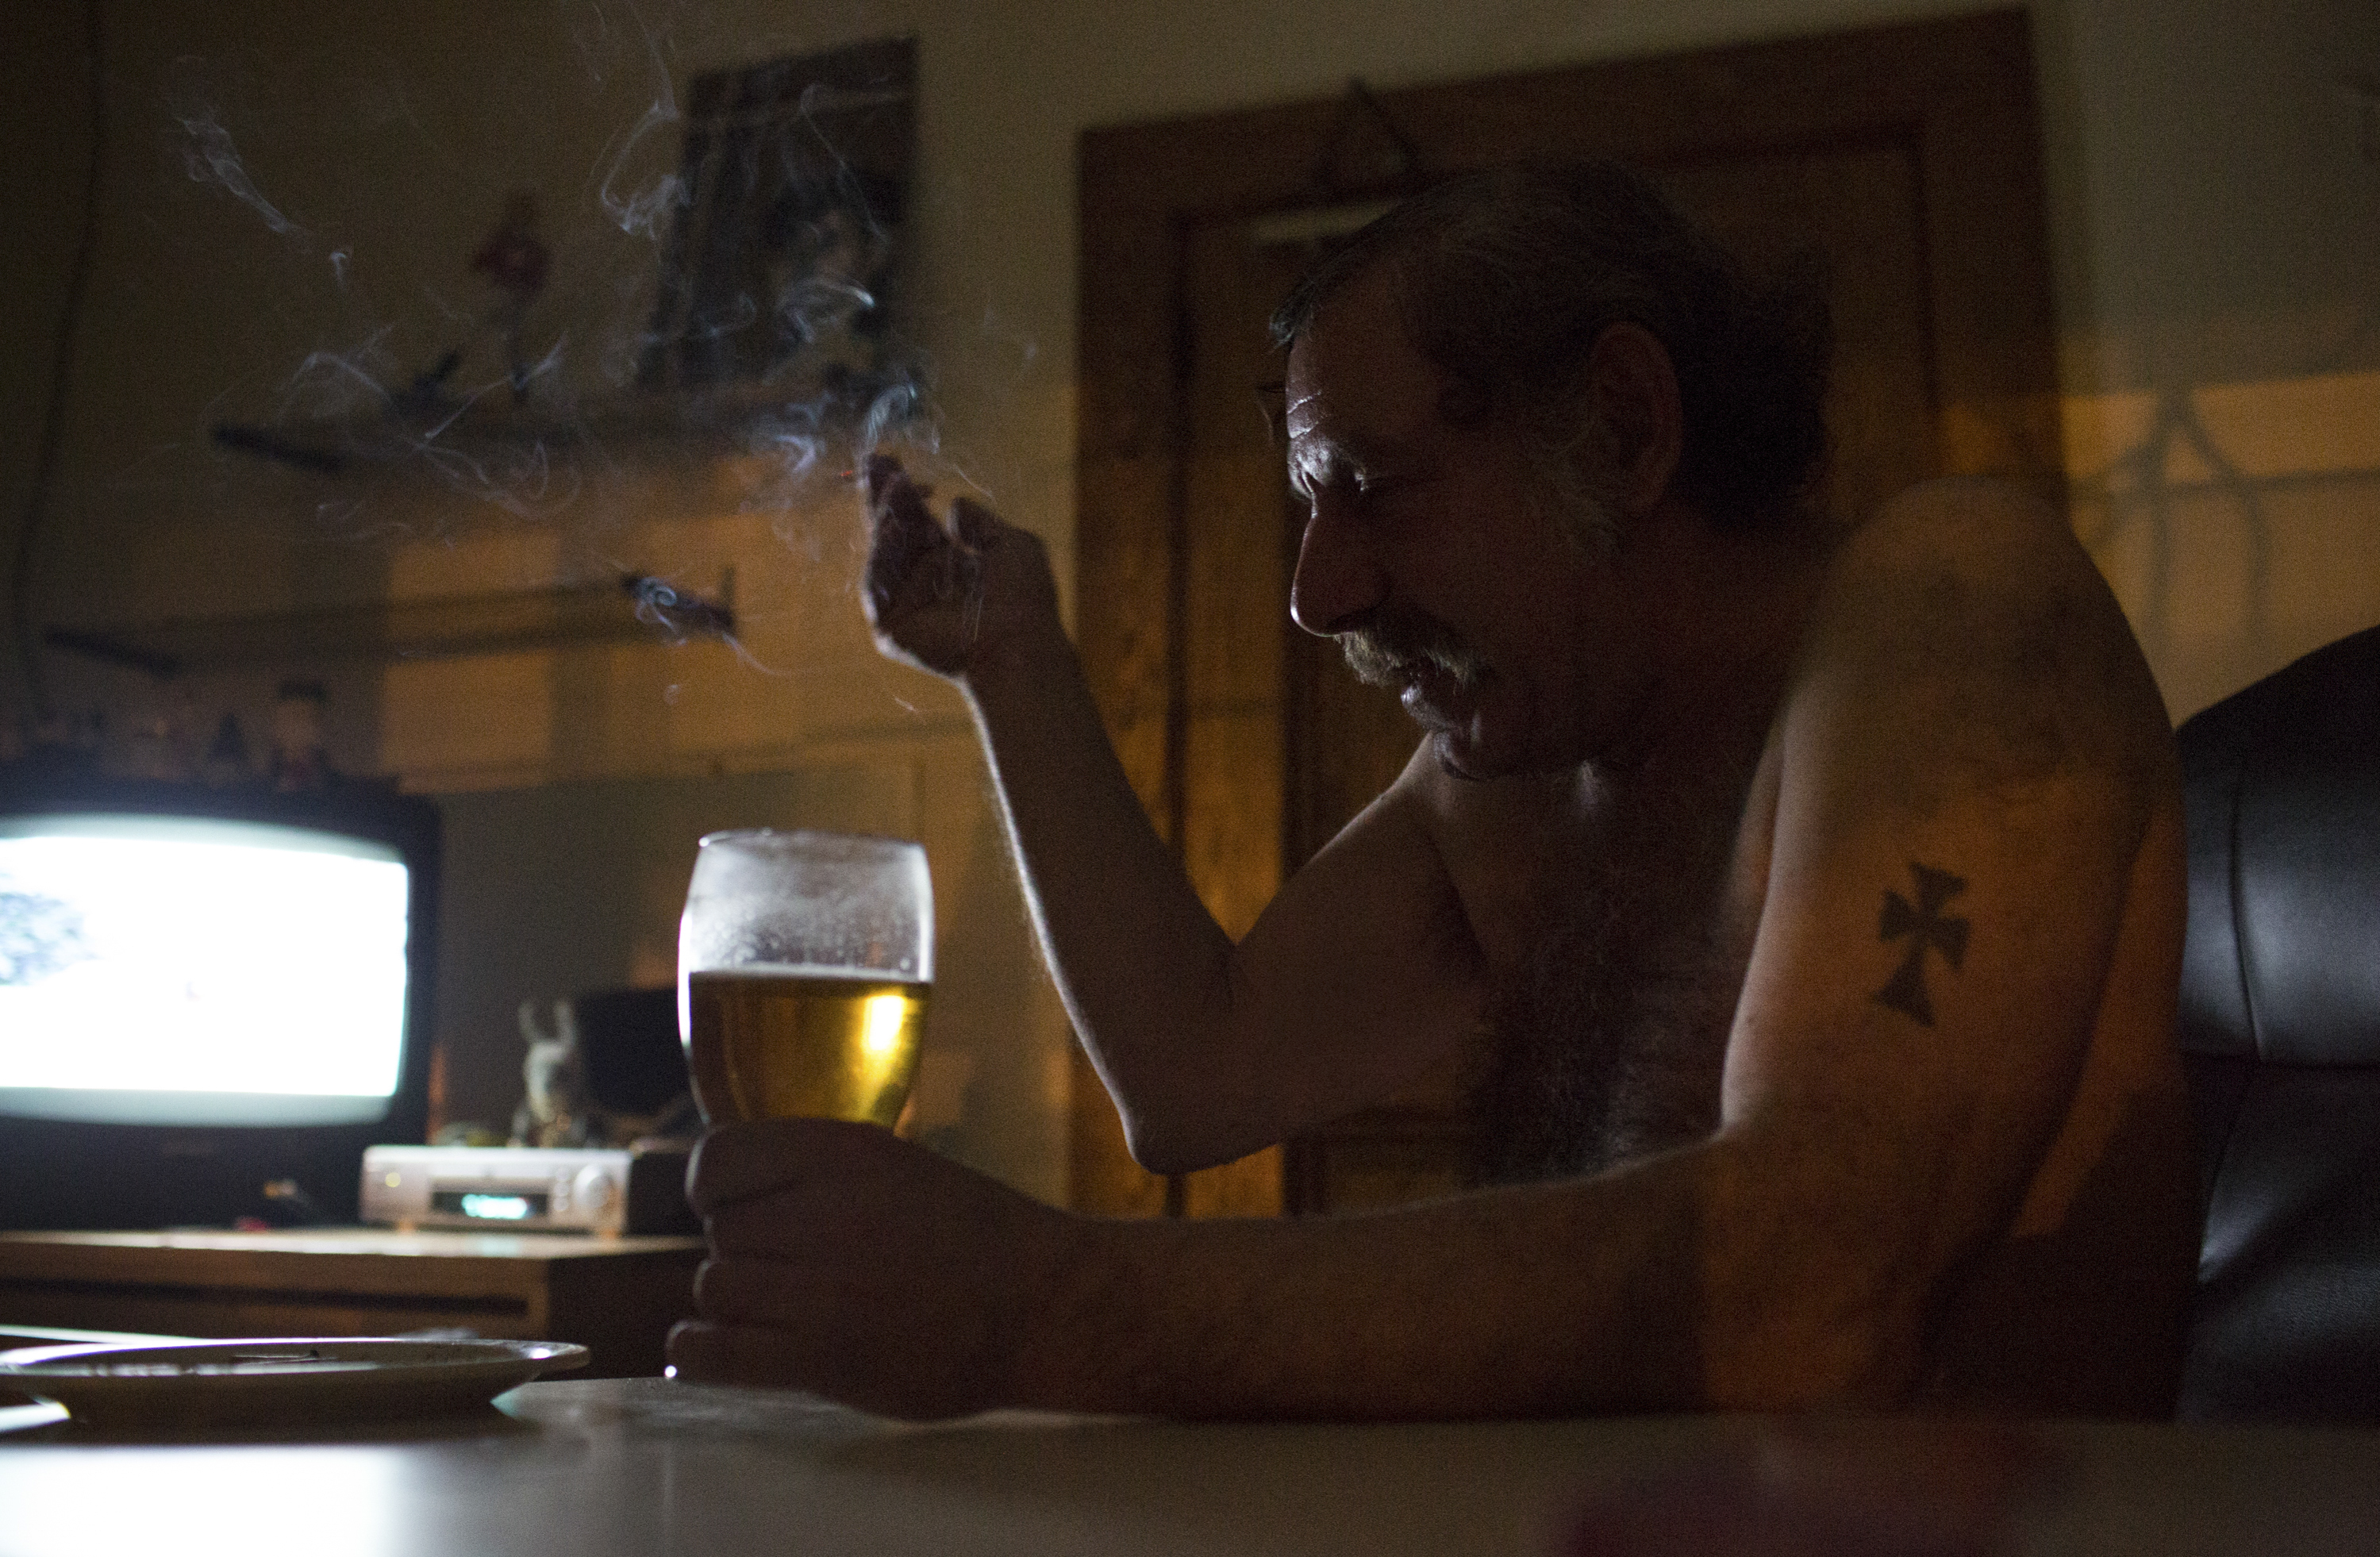 Bradley Loce, 56, takes a quiet moment in his Dorothy Day House apartment in Rochester, NY on Feb. 23, 2014. "My son hasn't talked to me in fifteen years. He's ashamed of me because I'm a drunk. Can't blame him. I'm not a criminal though."  Bradley has suffered from alcoholism his entire life, has struggled with chronic homelessness and mental illness diagnosis that he rejects, refusing medication. The Dorothy Day House has been in place since late 2012, providing a housing first solution for people that are on the streets. Photo by Zack DeClerk